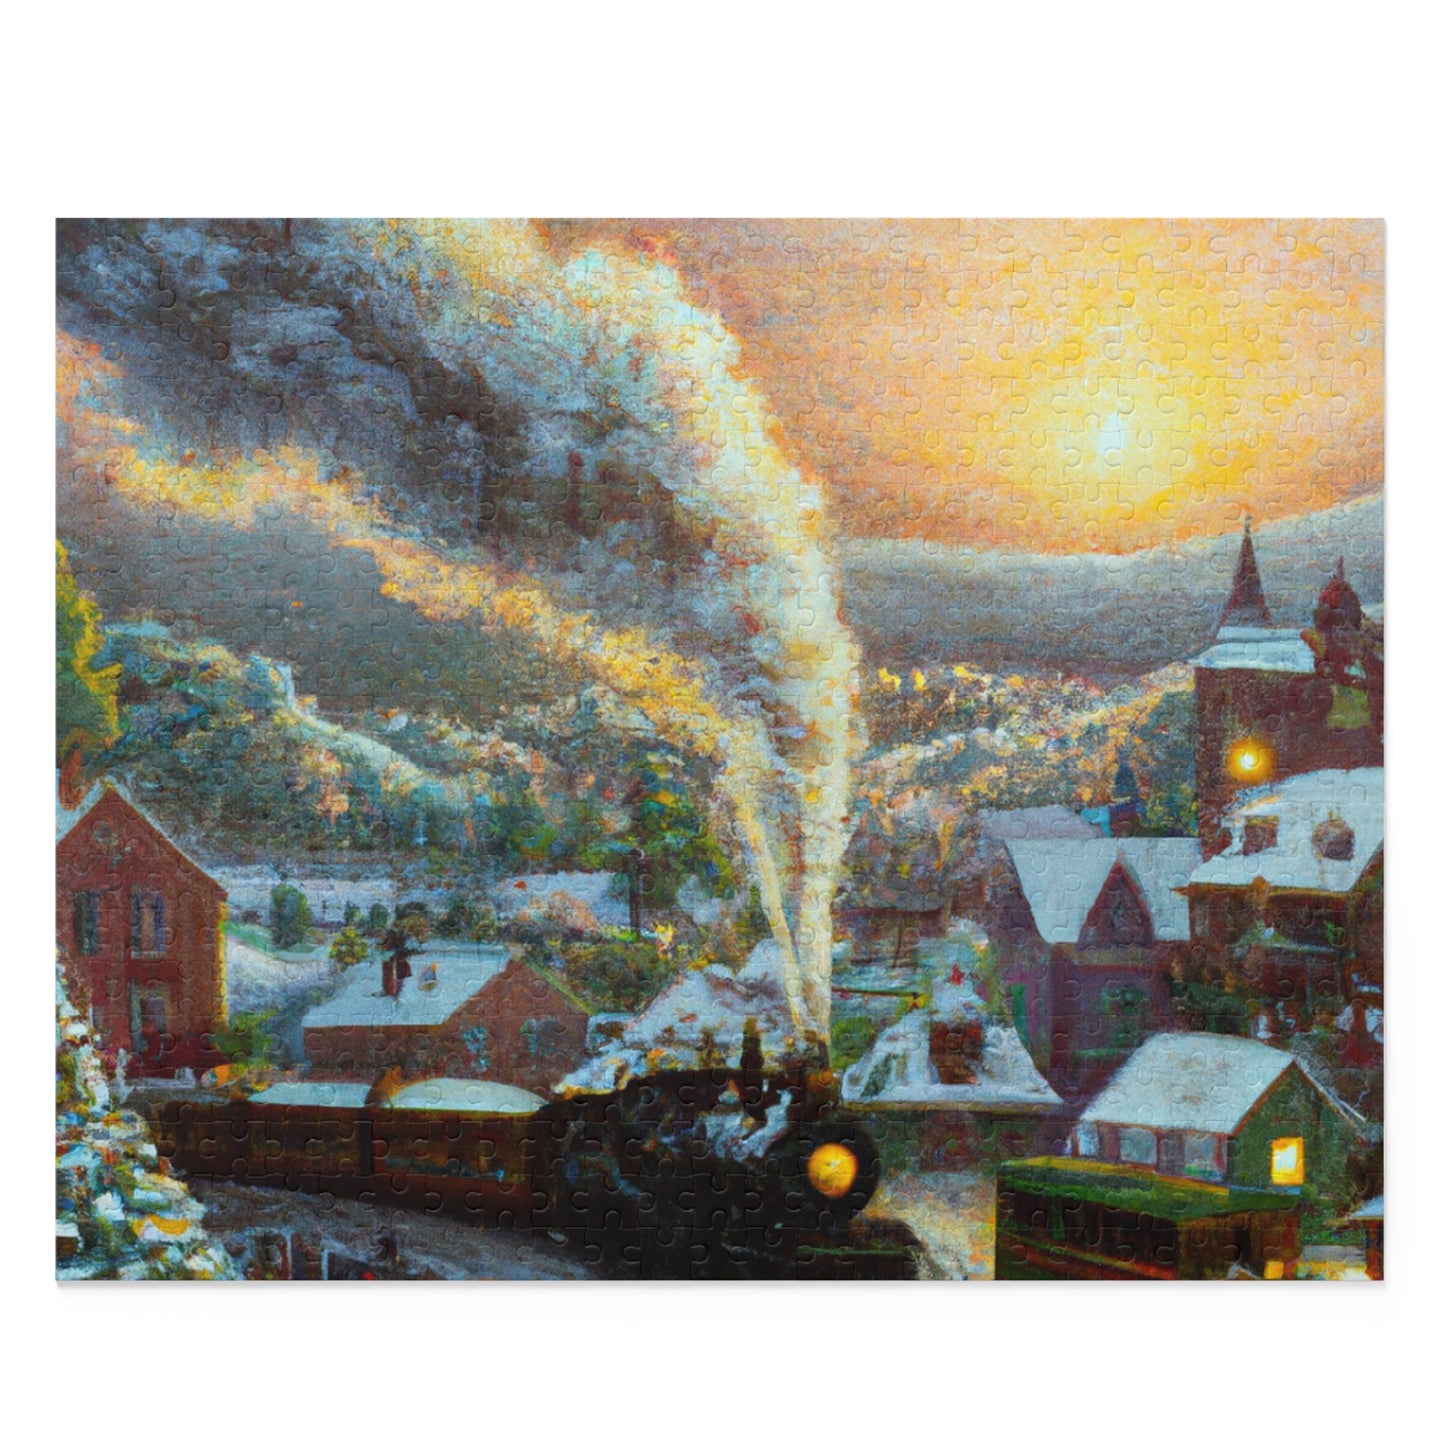 Vintage Christmas Village - JigSaw Puzzle 500 Piece: Rudolph Reindeerhart - Christmas Gift | Holiday Scenes